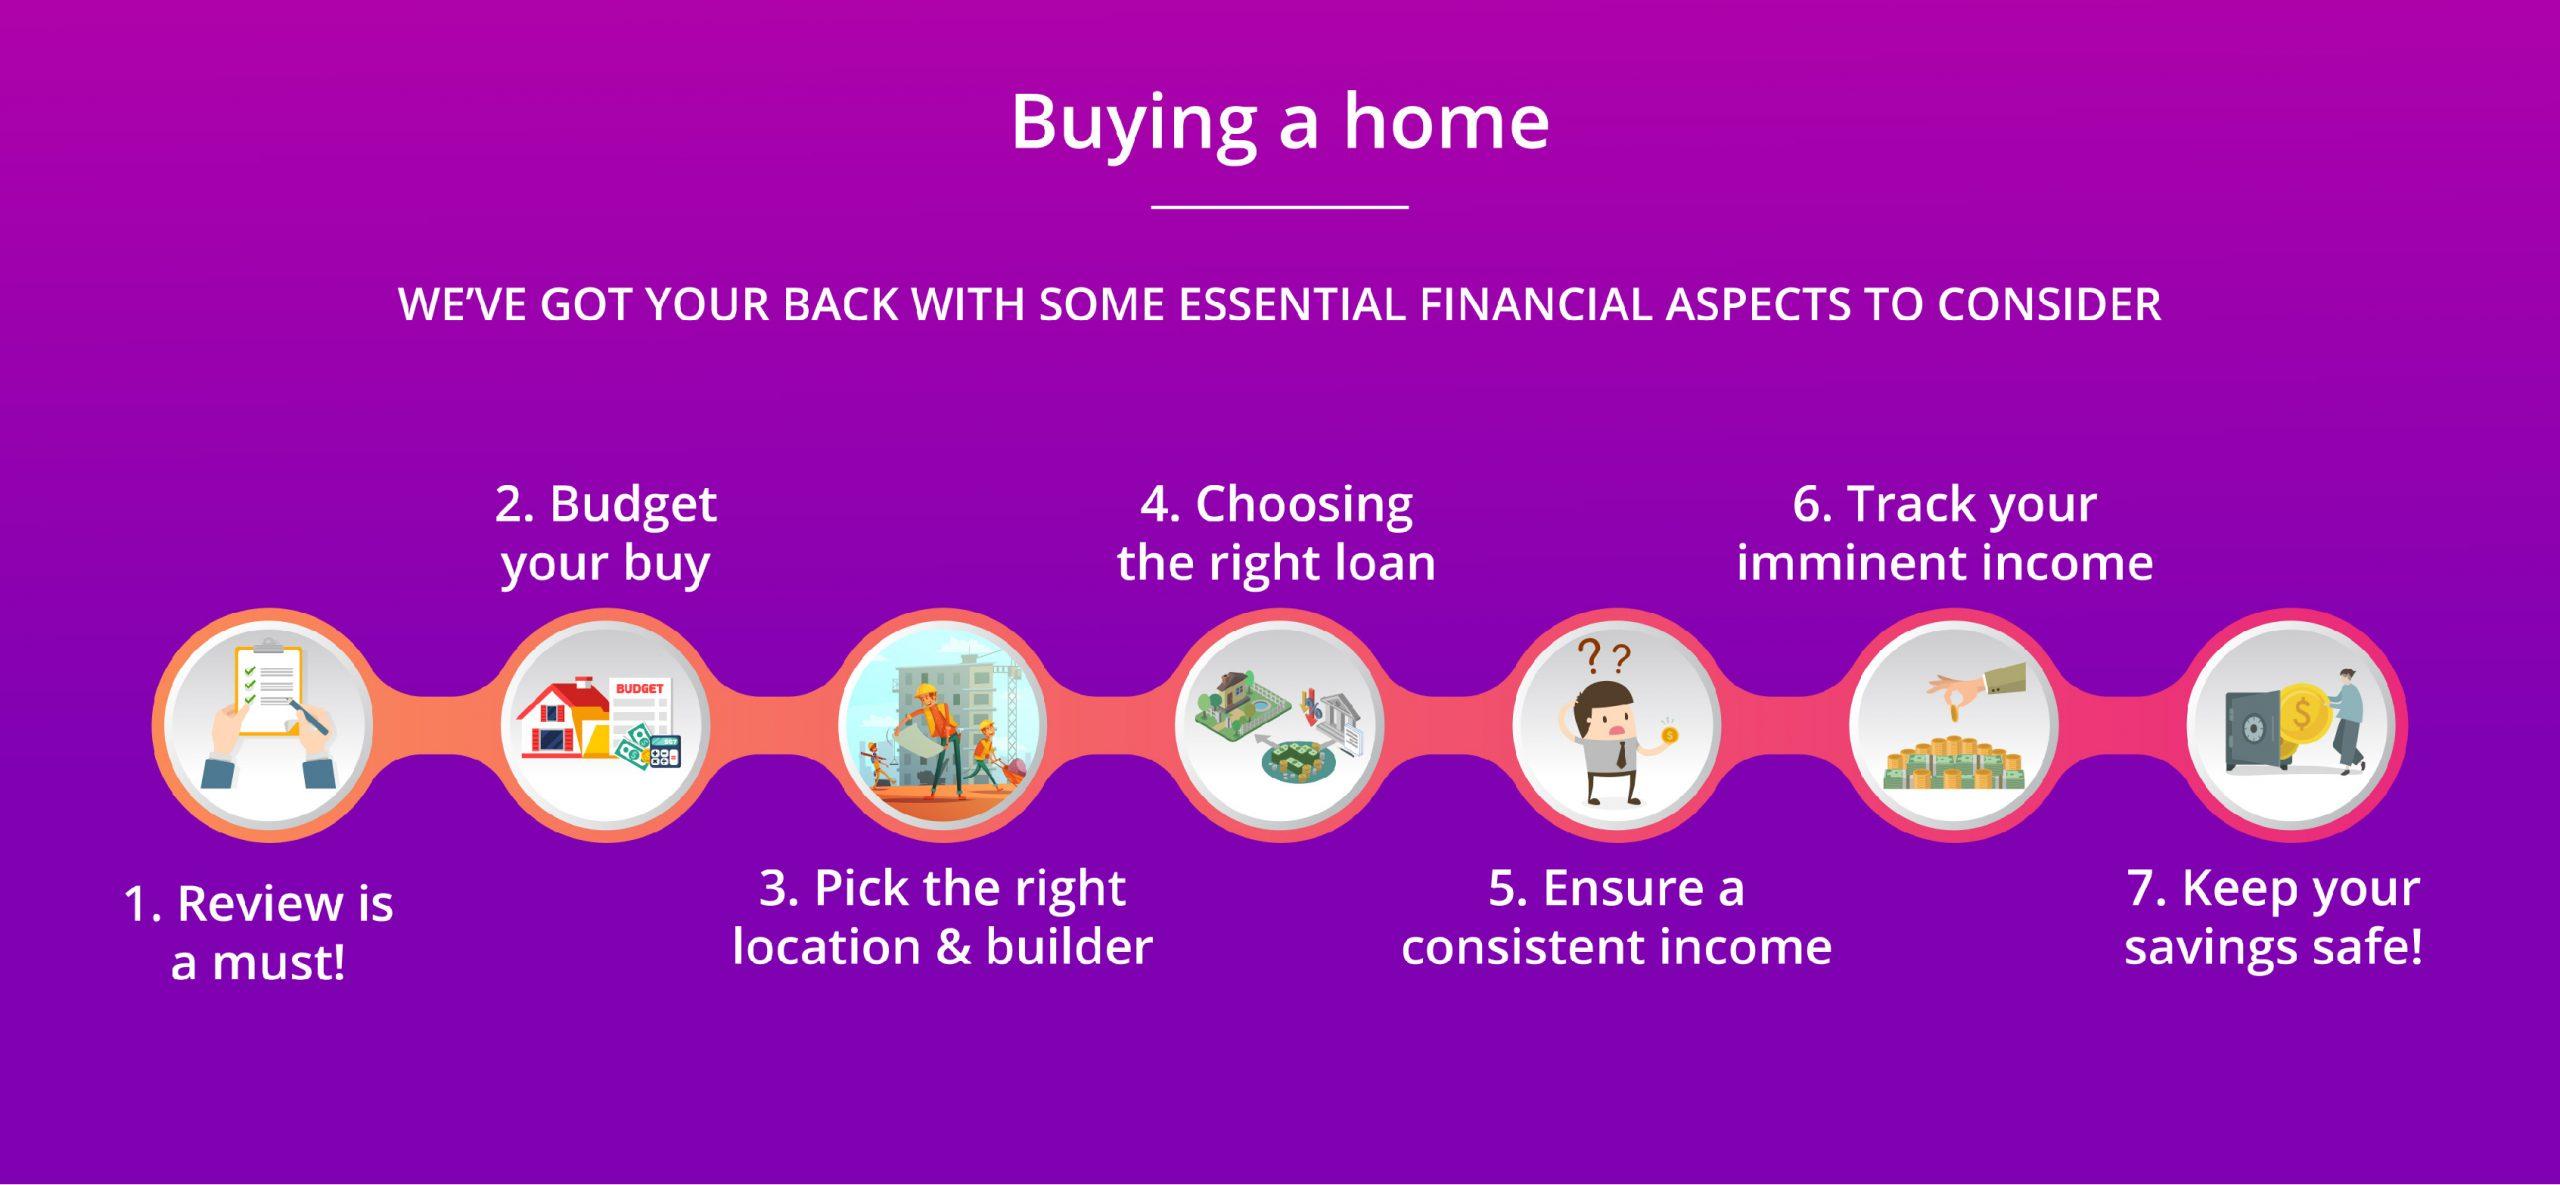 Buying a home?